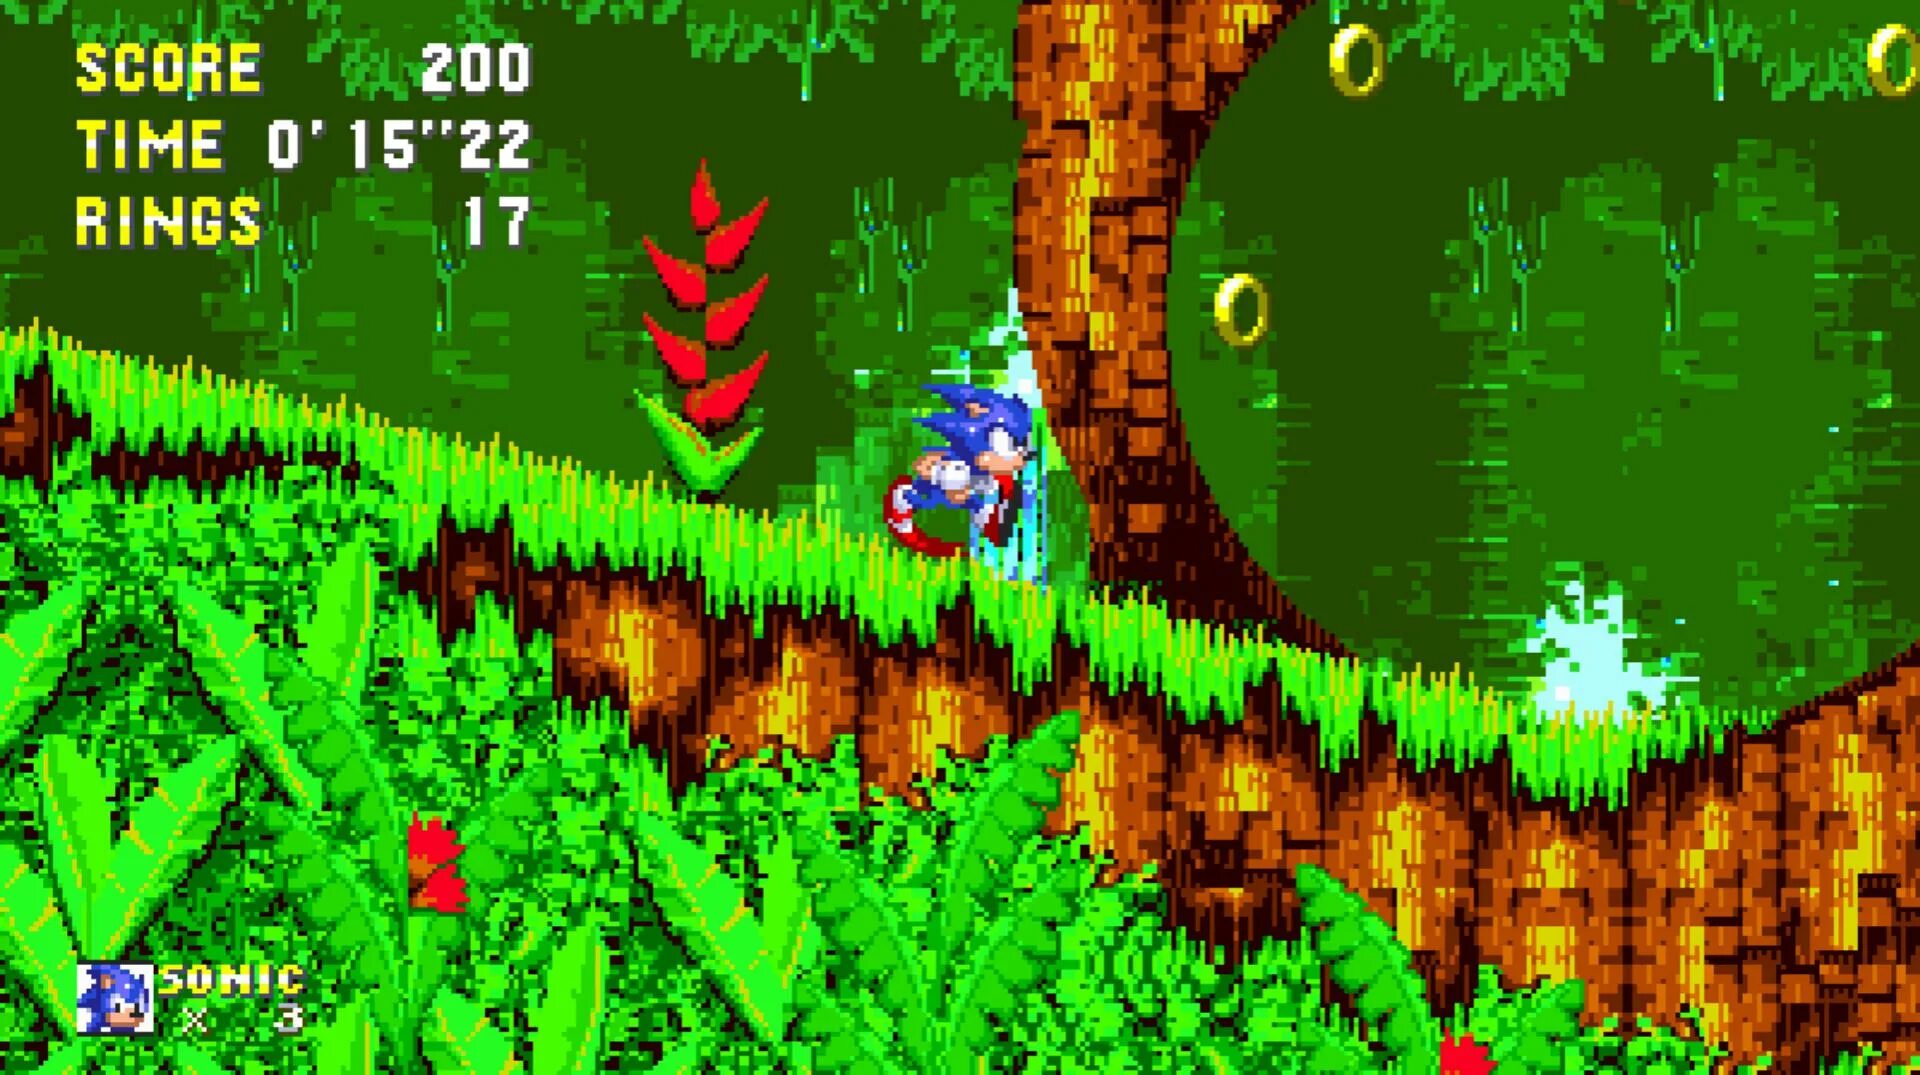 Соник 3 АИР. Sonic 3 a.i.r. (Angel Island revisited). Sonic 3 and Knuckles. Sonic 3 Forever. Sonic 3 mode